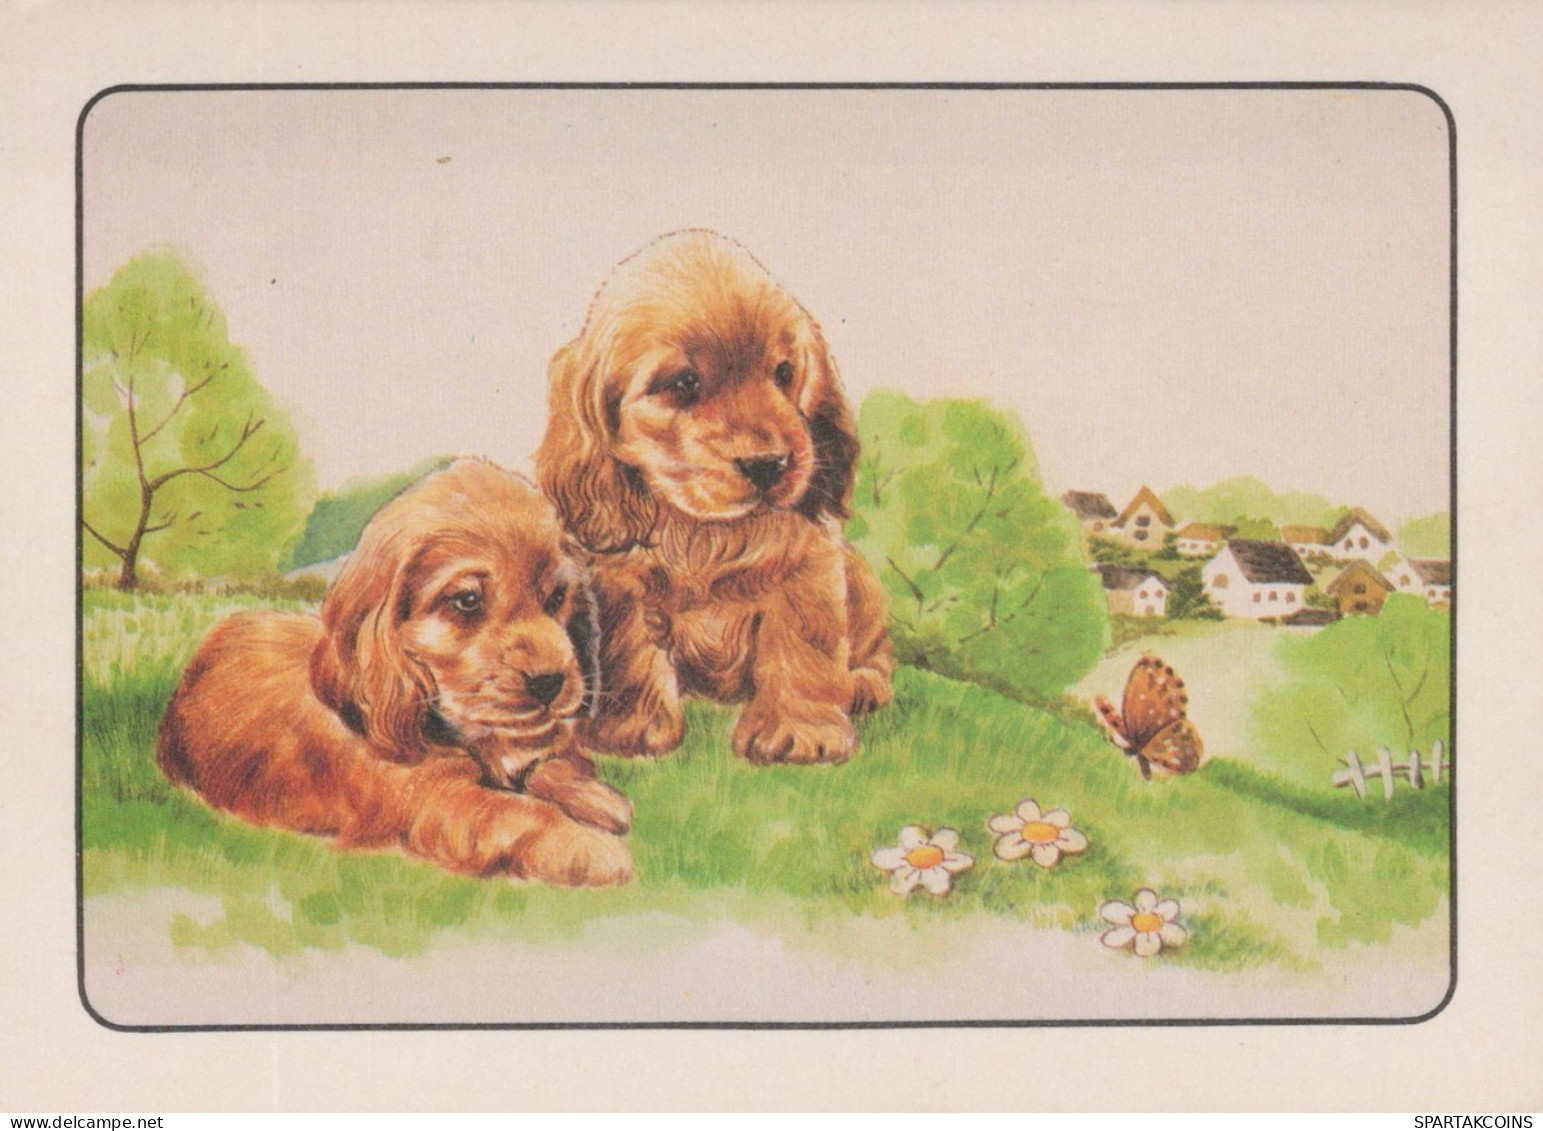 CANE Animale Vintage Cartolina CPSM #PAN544.A - Dogs